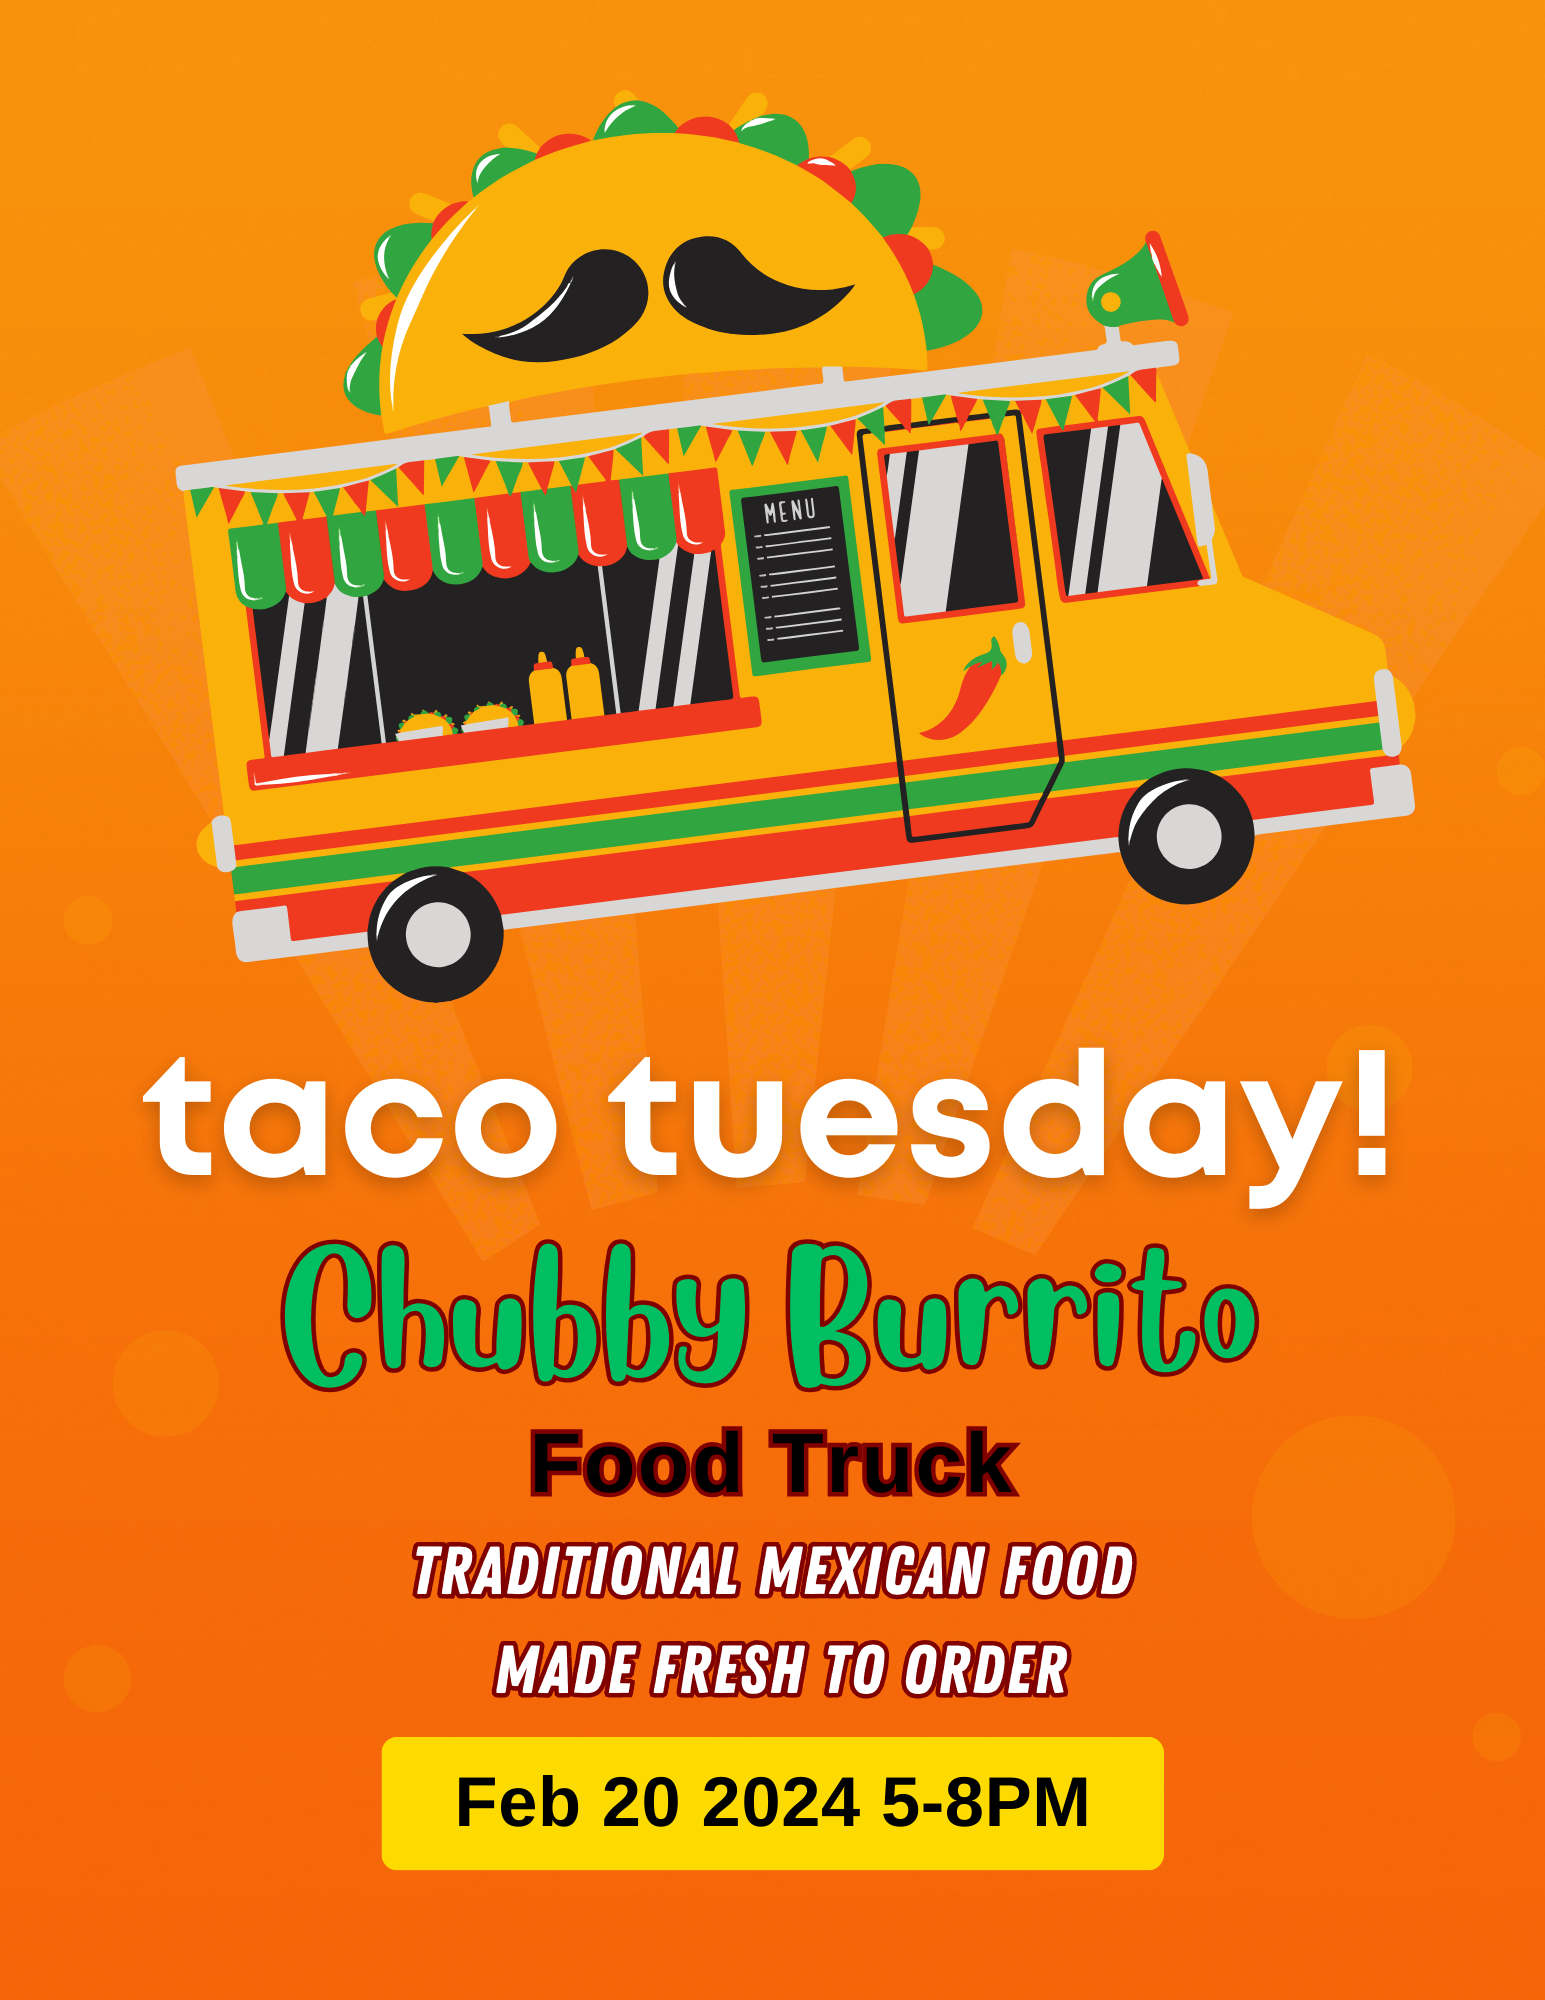 Taco Tuesday moved to Wednesday, February 21